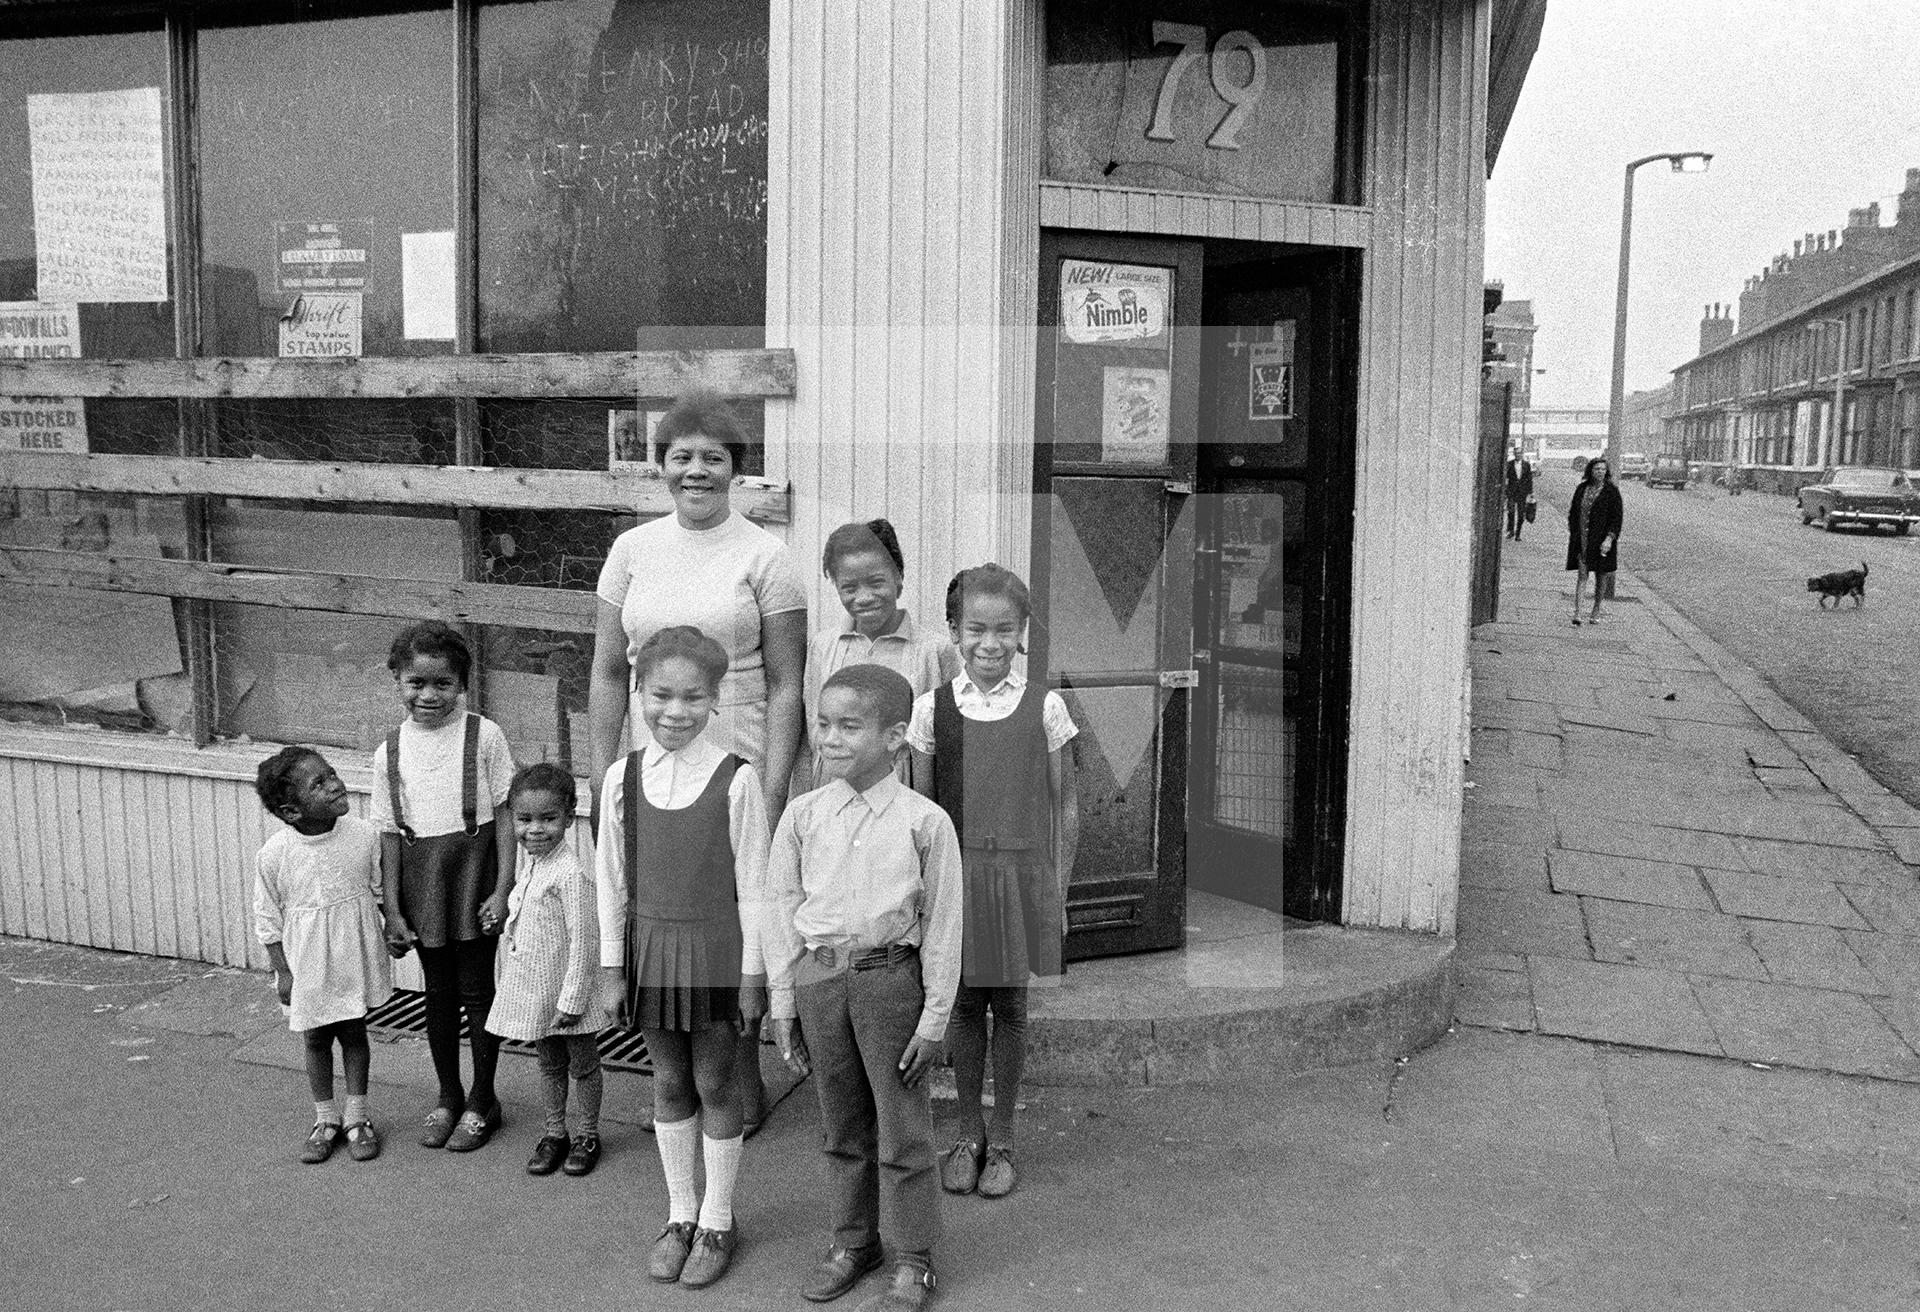 Caribbean food store, 79 Greame Street. The sign in the window reads ‘Henry Shop, Bread, Fish, Chow-Chow, Mackrel...’ Left-to-right: Sharon Henry, Michelle Henry, Pauline Crooks, Monica Crooks, Mrs Violet Henry, Freddy Crooks, Janet Henry, Sandra Crooks. Moss Side, Manchester. 1972 by Daniel Meadows